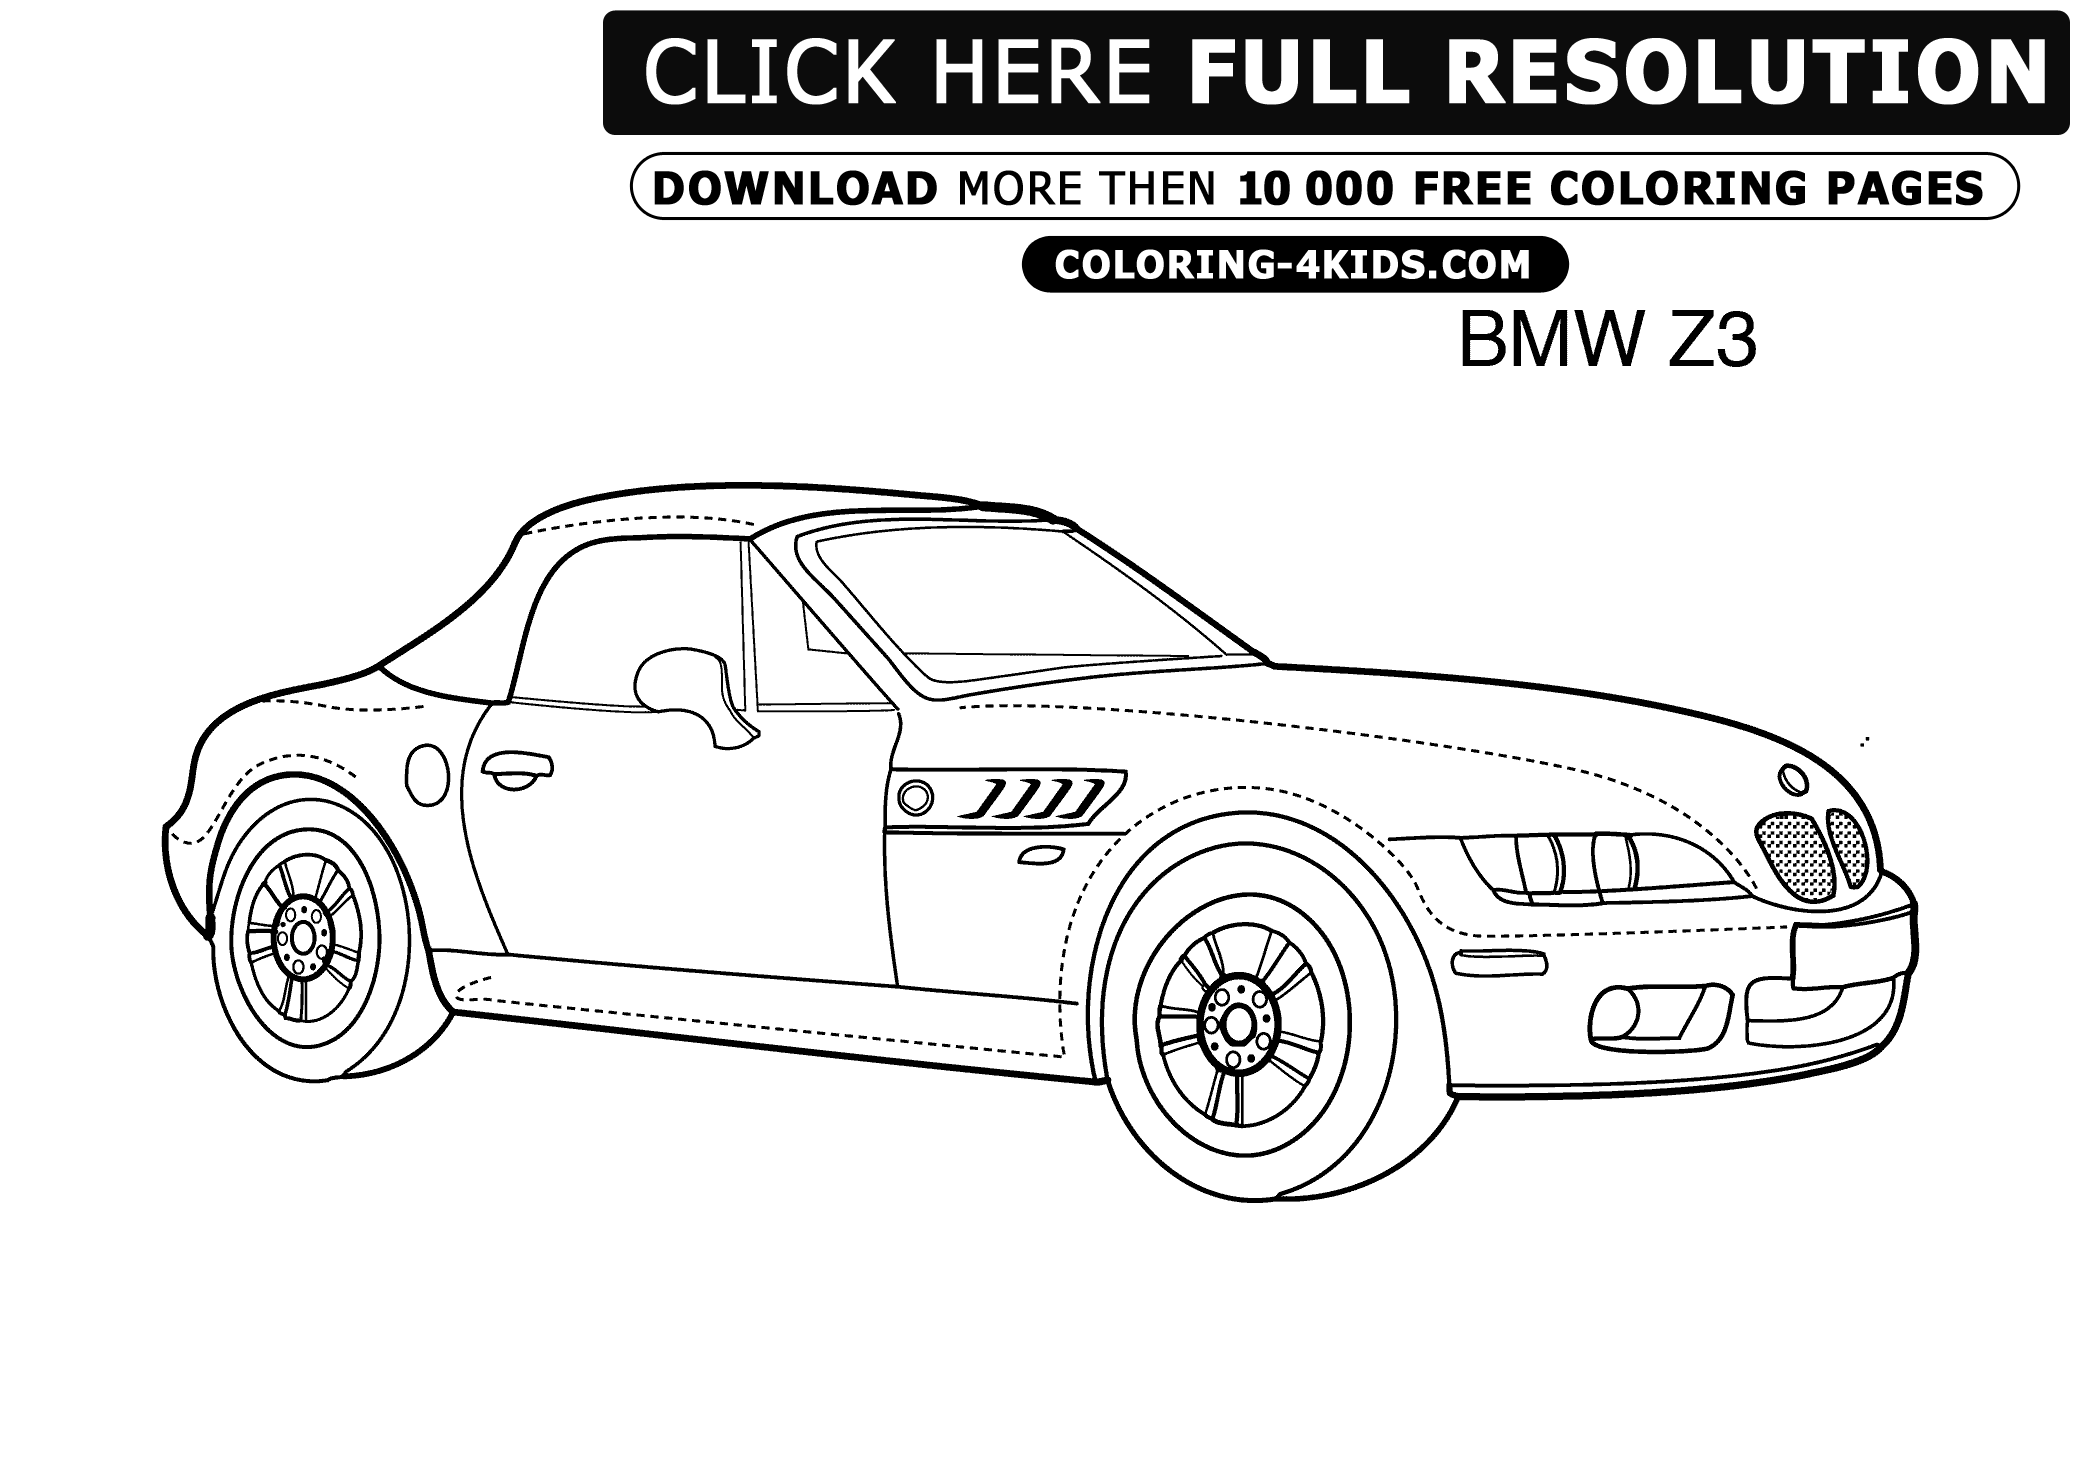 Z3 BMW Car Pictures to Color Printable Coloring Pages for Kids